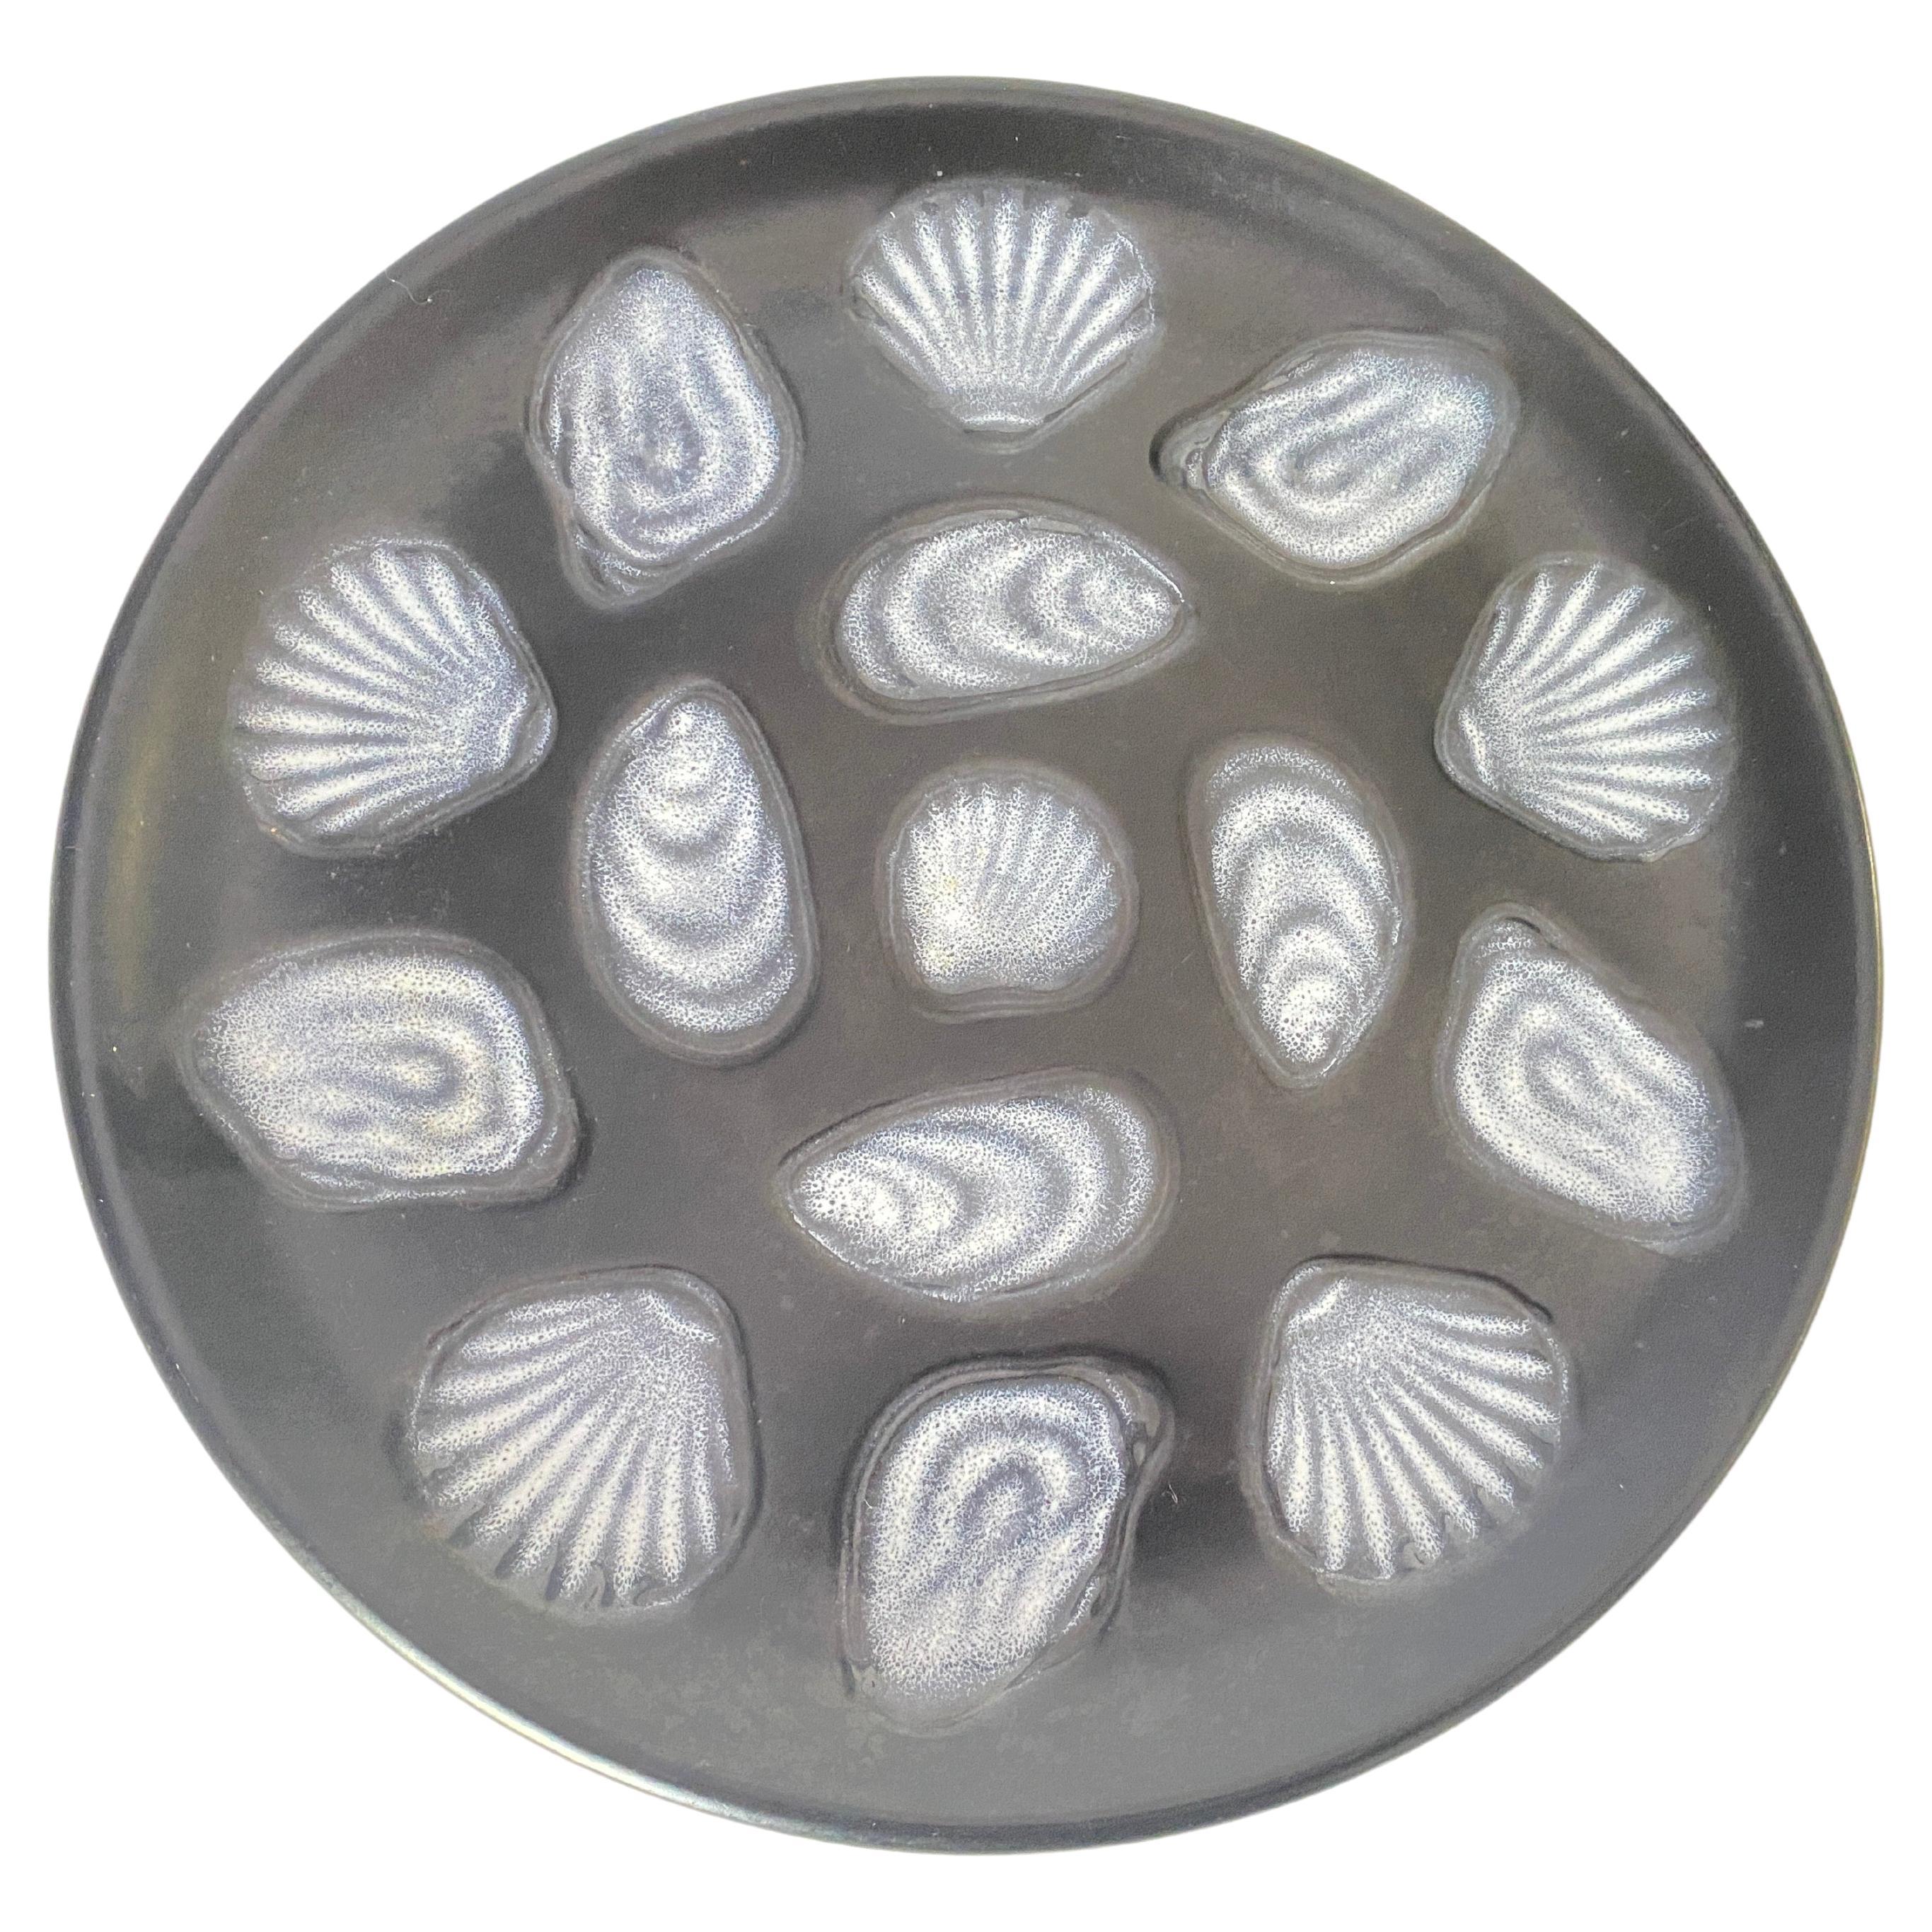 Large Oyster Plate in Ceramic BlACK and White Color, 1960 France by Elchinger For Sale